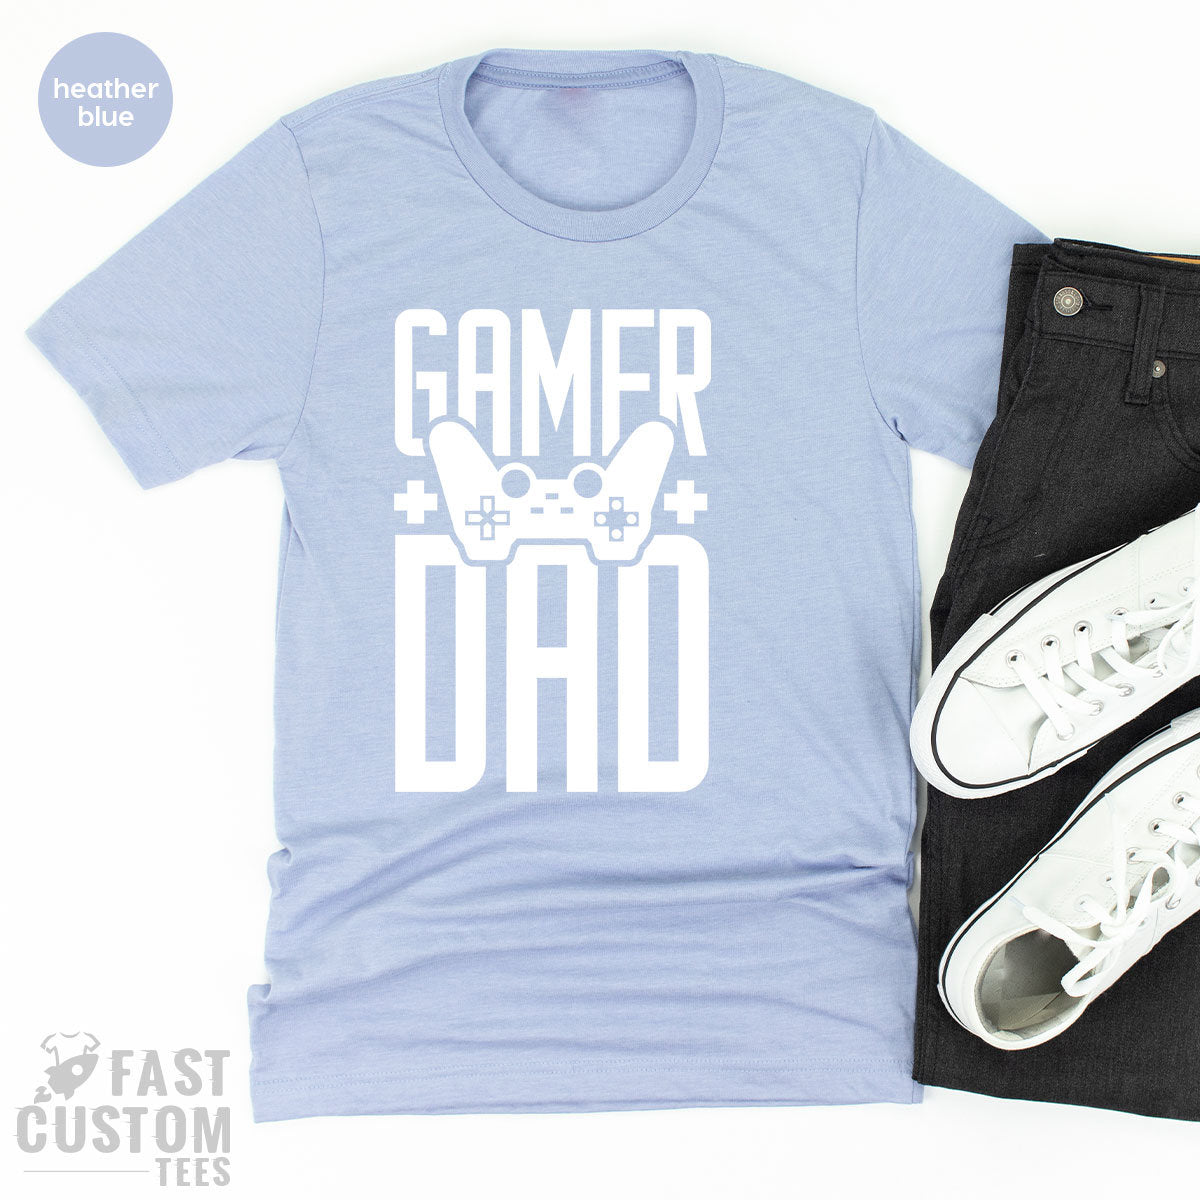 Father Day Shirt, Fathers Day Gift, Gamer Dad TShirt, Gaming Dad Shirt, Best Dad Shirt, Gaming Father Tee, Gift For Dad, Funny Dad Shirt - Fastdeliverytees.com